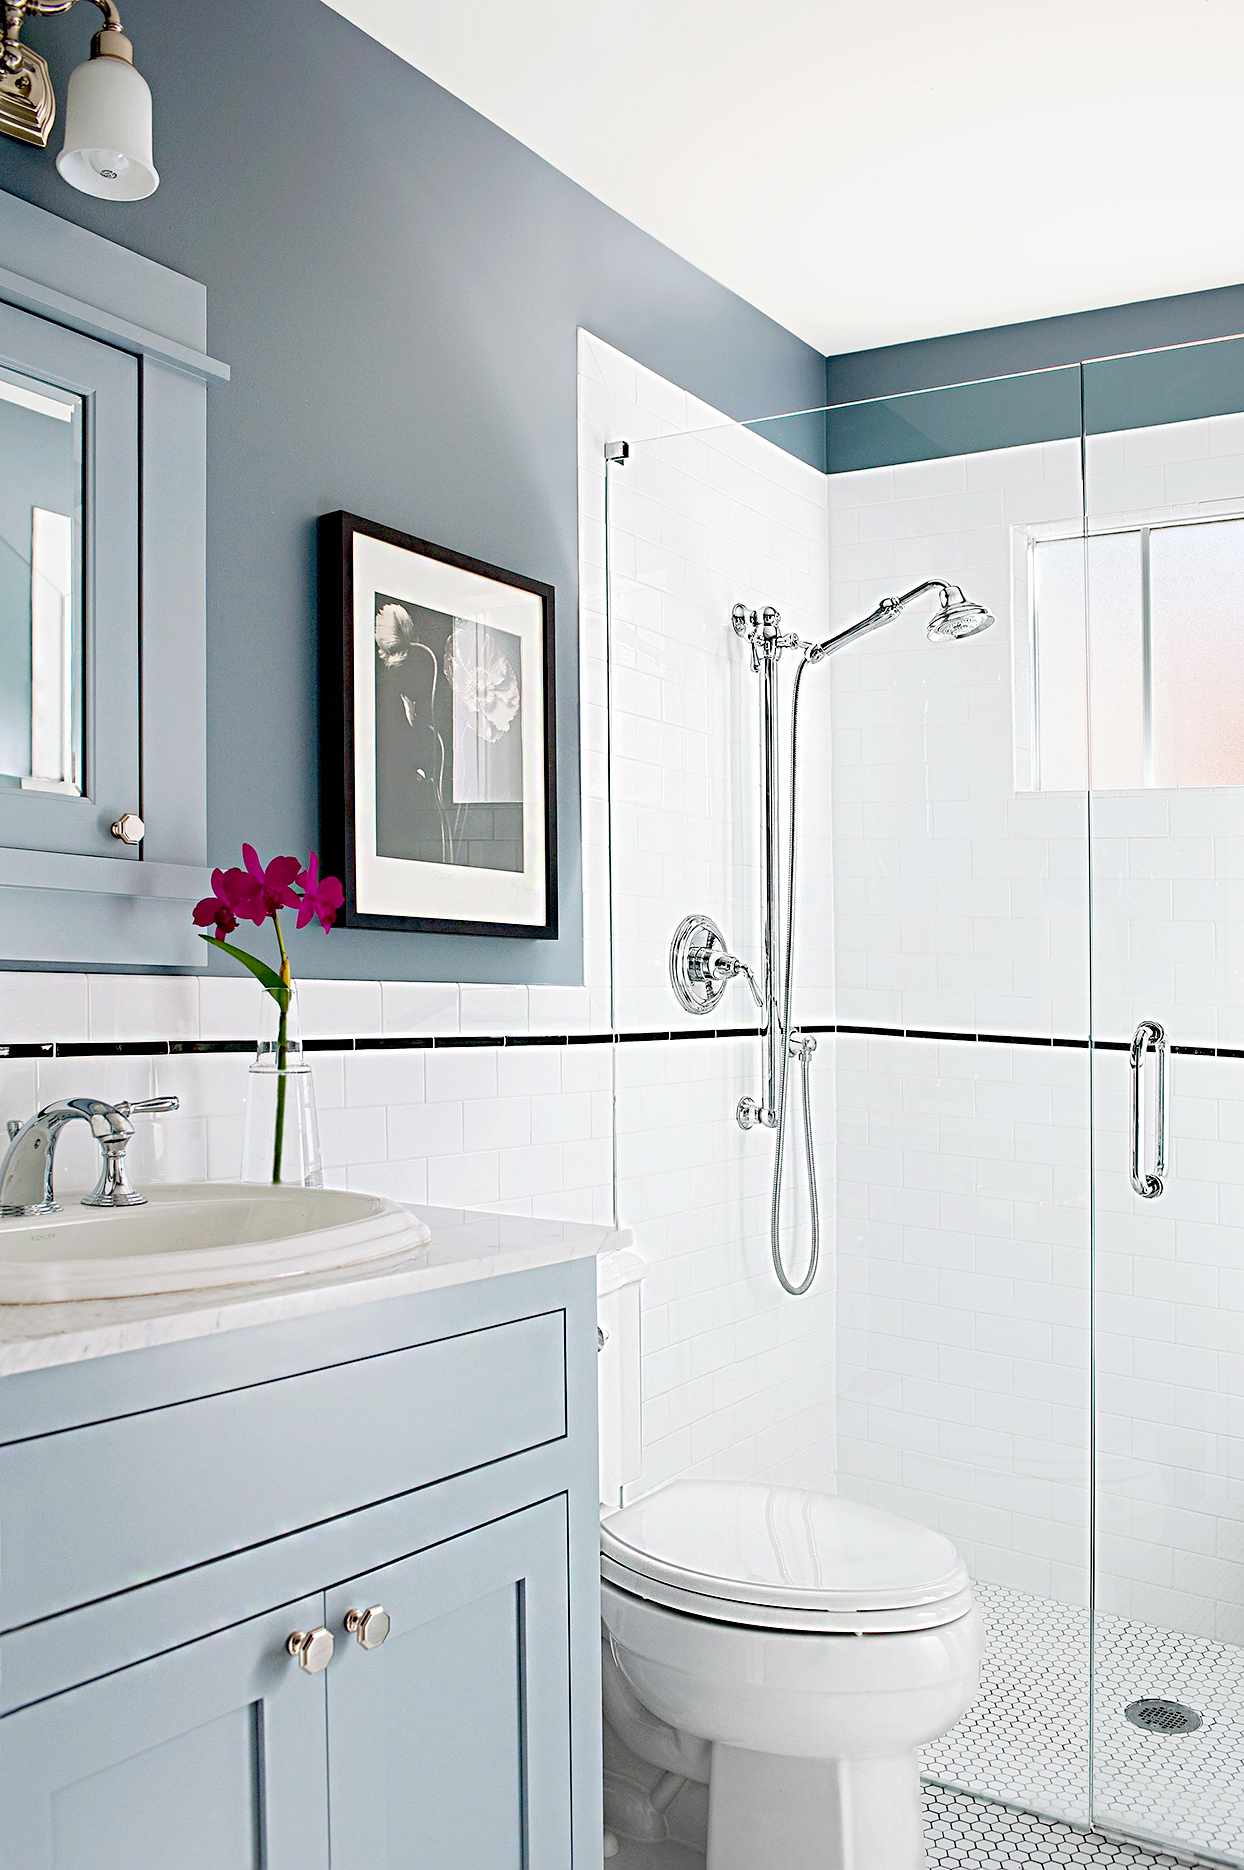 Bathroom with gray and white color theme